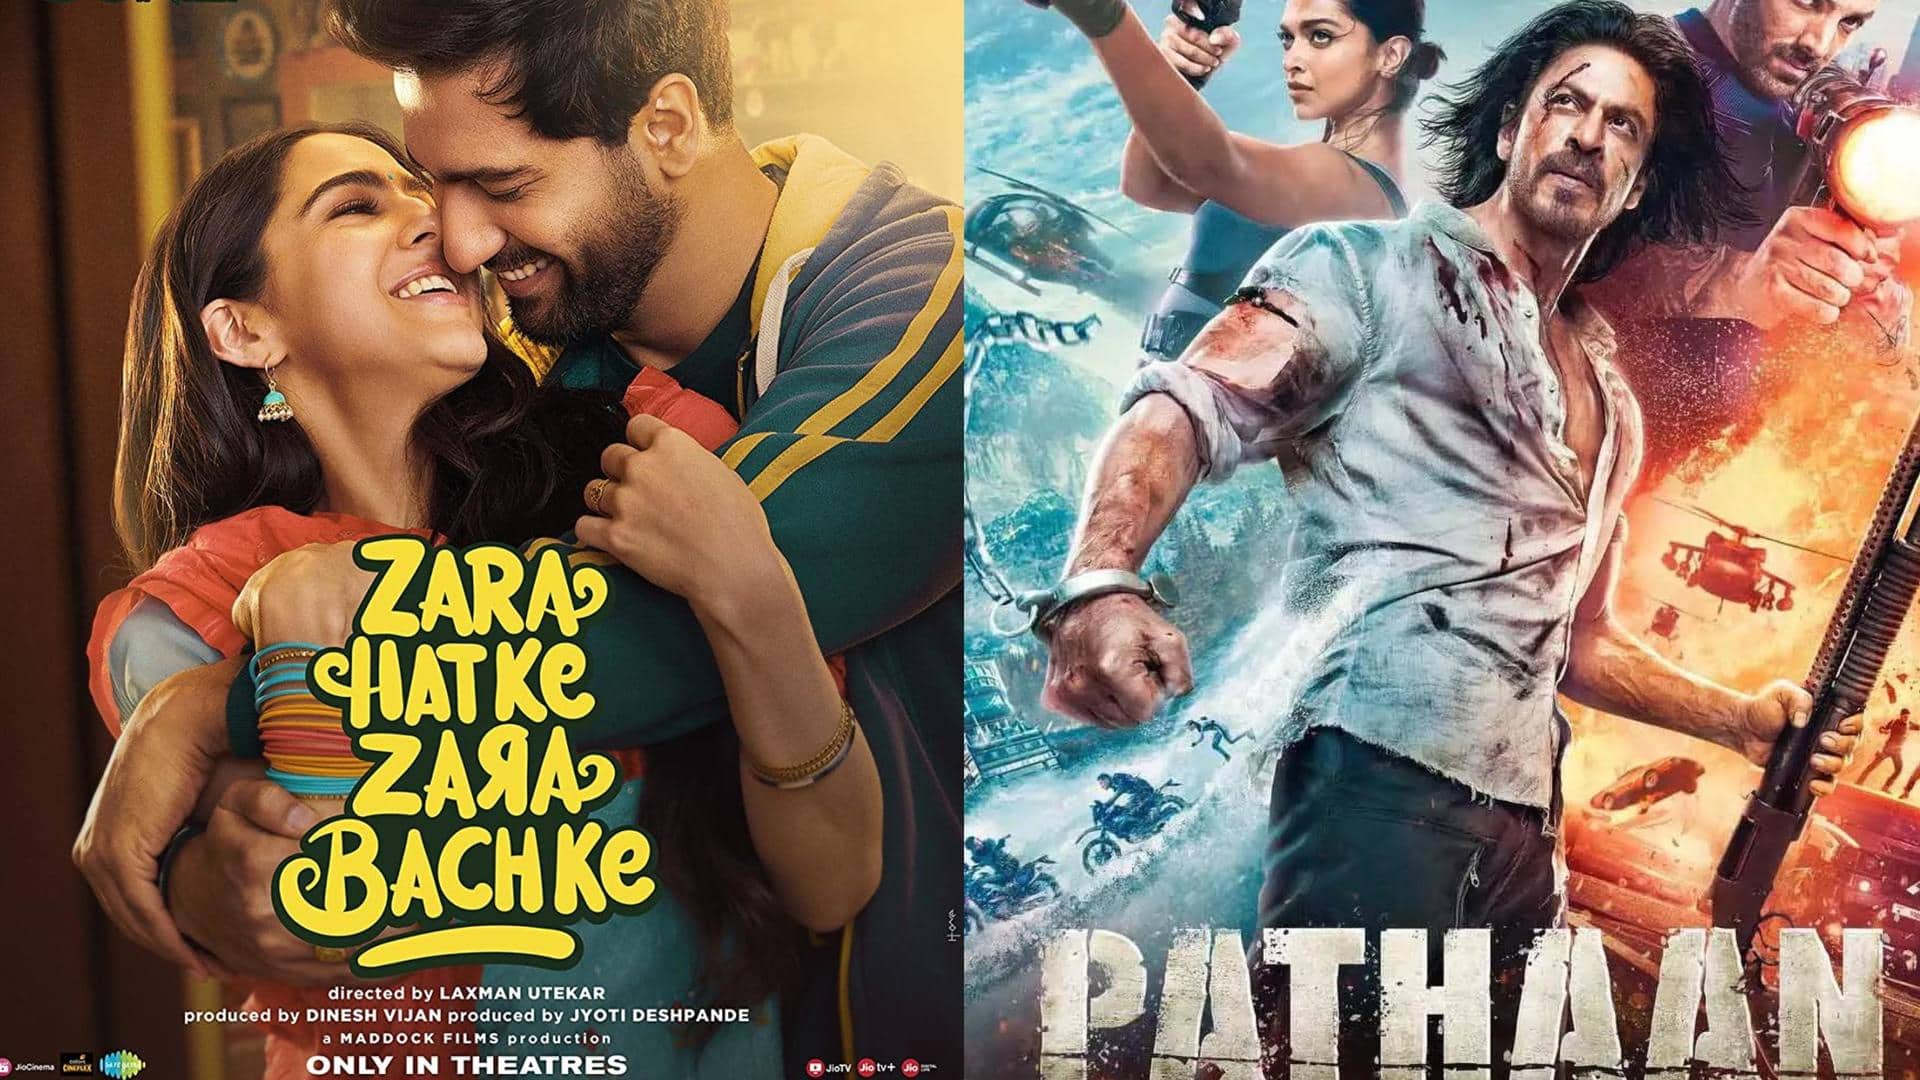 Gadar' to 'Pathaan': Bollywood movies that ran special ticket offers